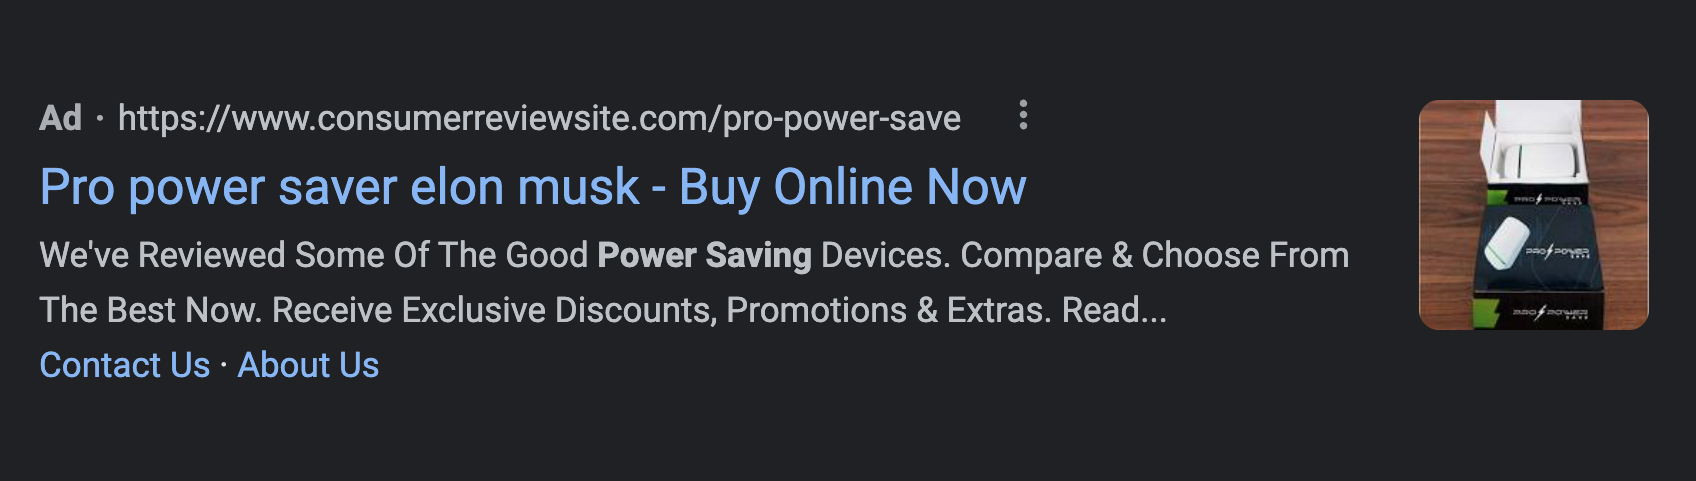 Was Pro Power Saver Endorsed by Elon Musk and Tesla?